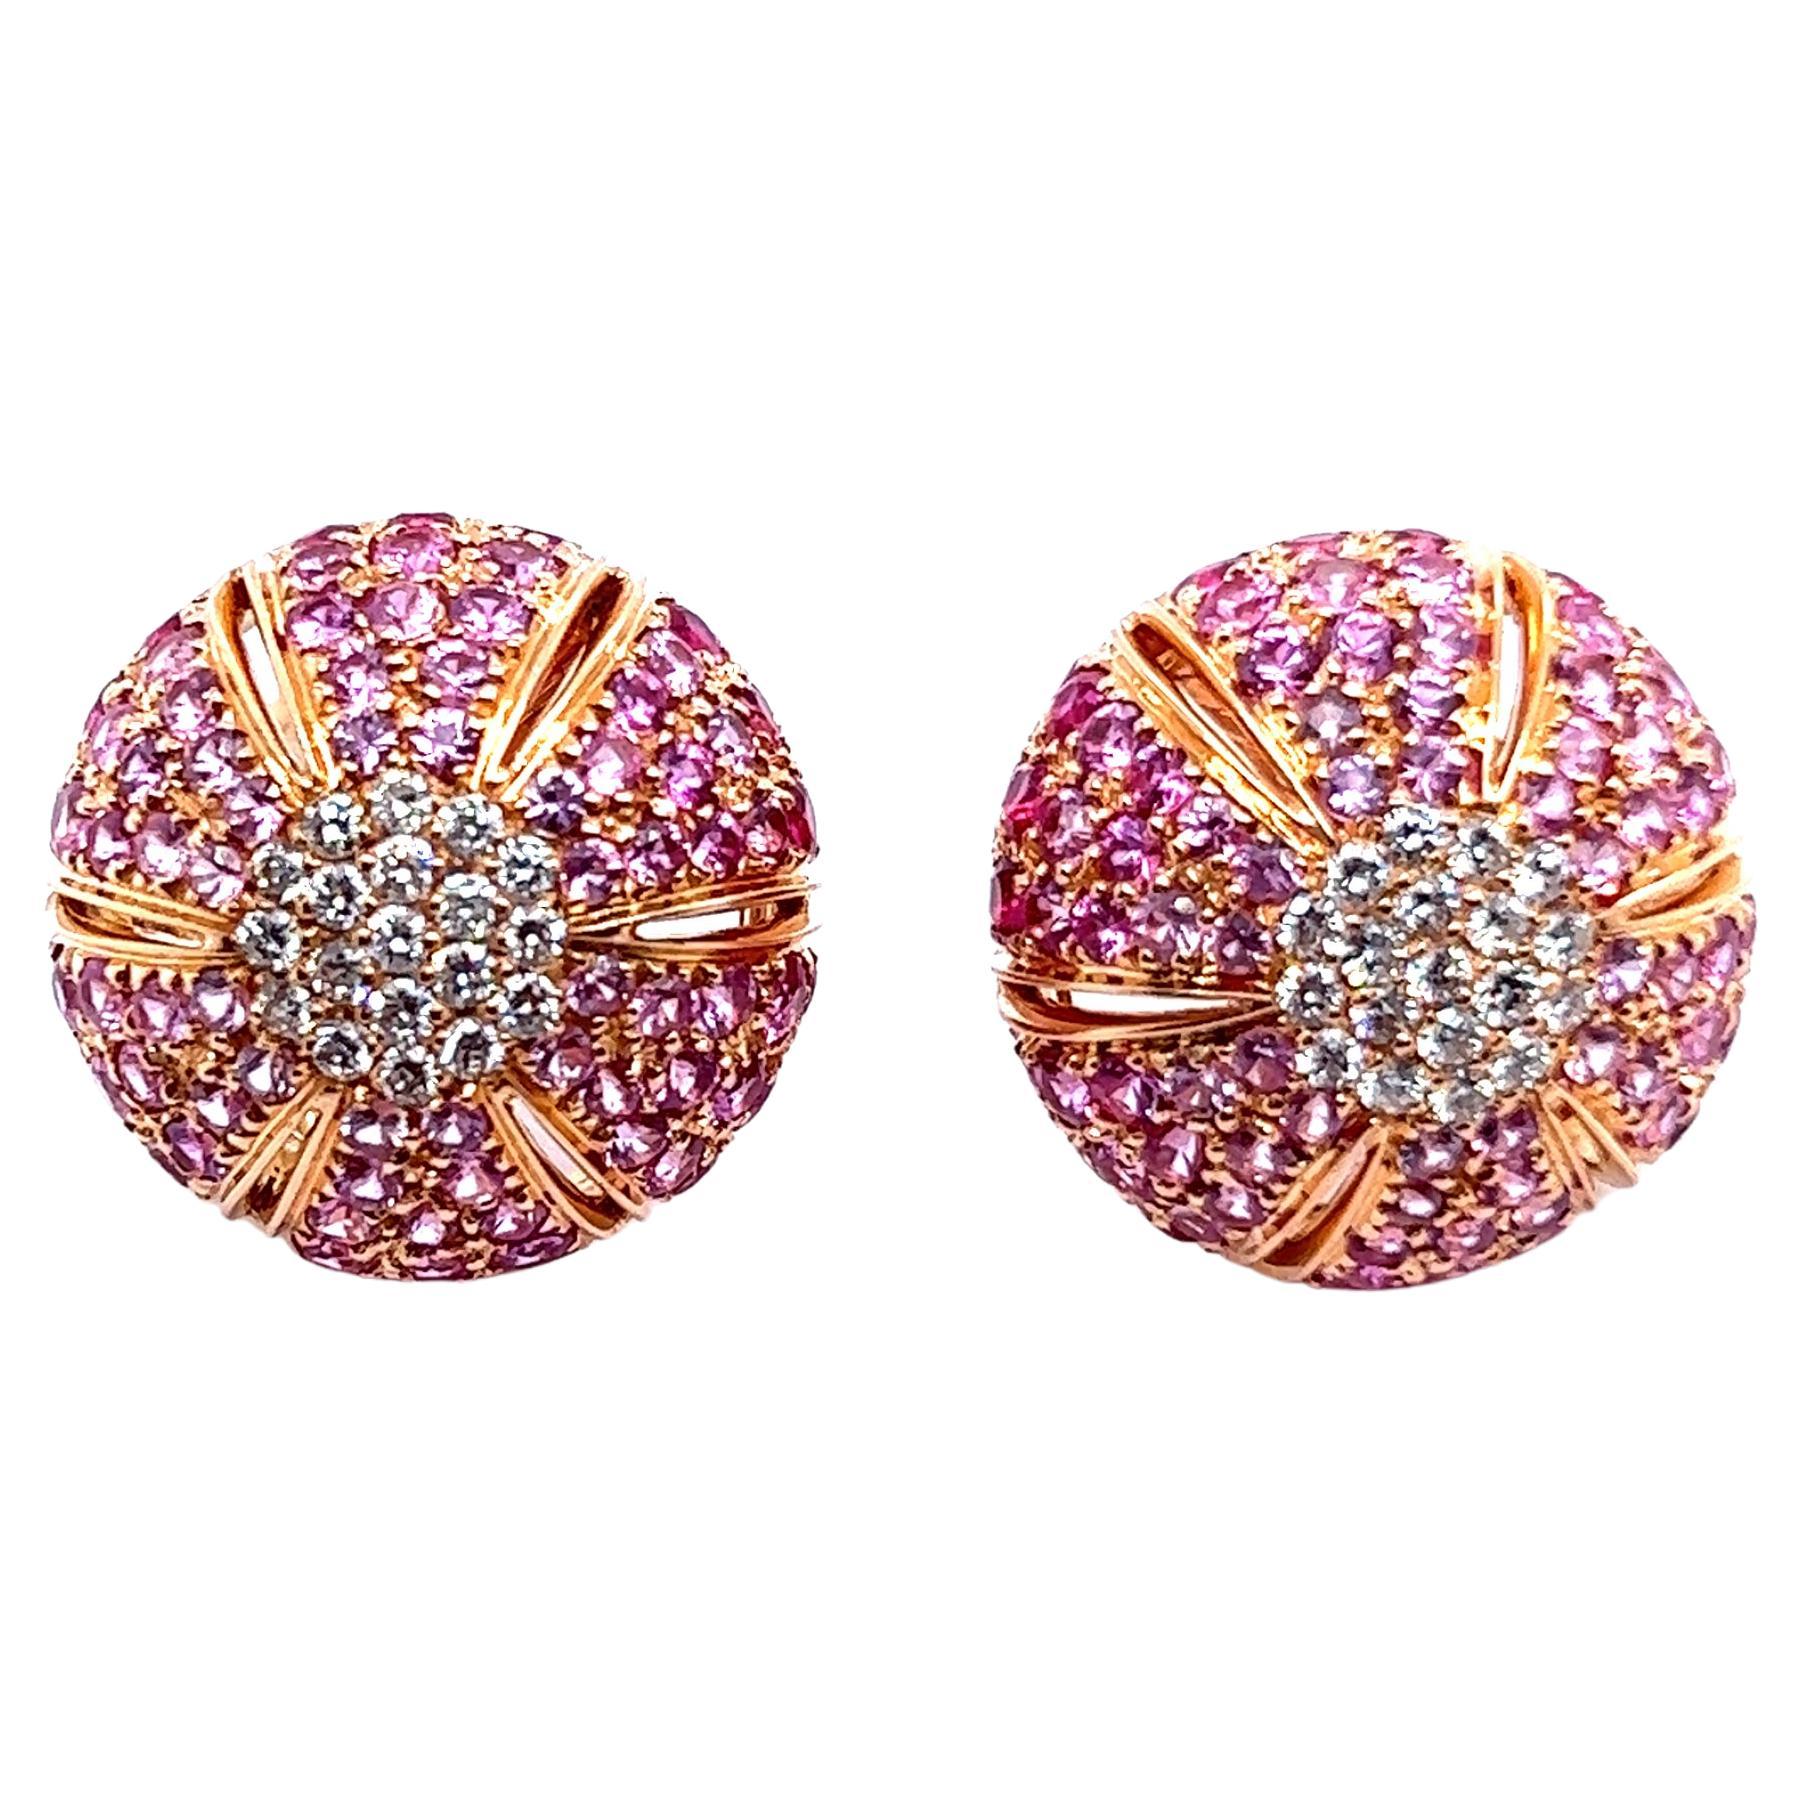 Earrings with Pink Sapphires & Diamonds in 18 Karat Rose Gold by Damiani